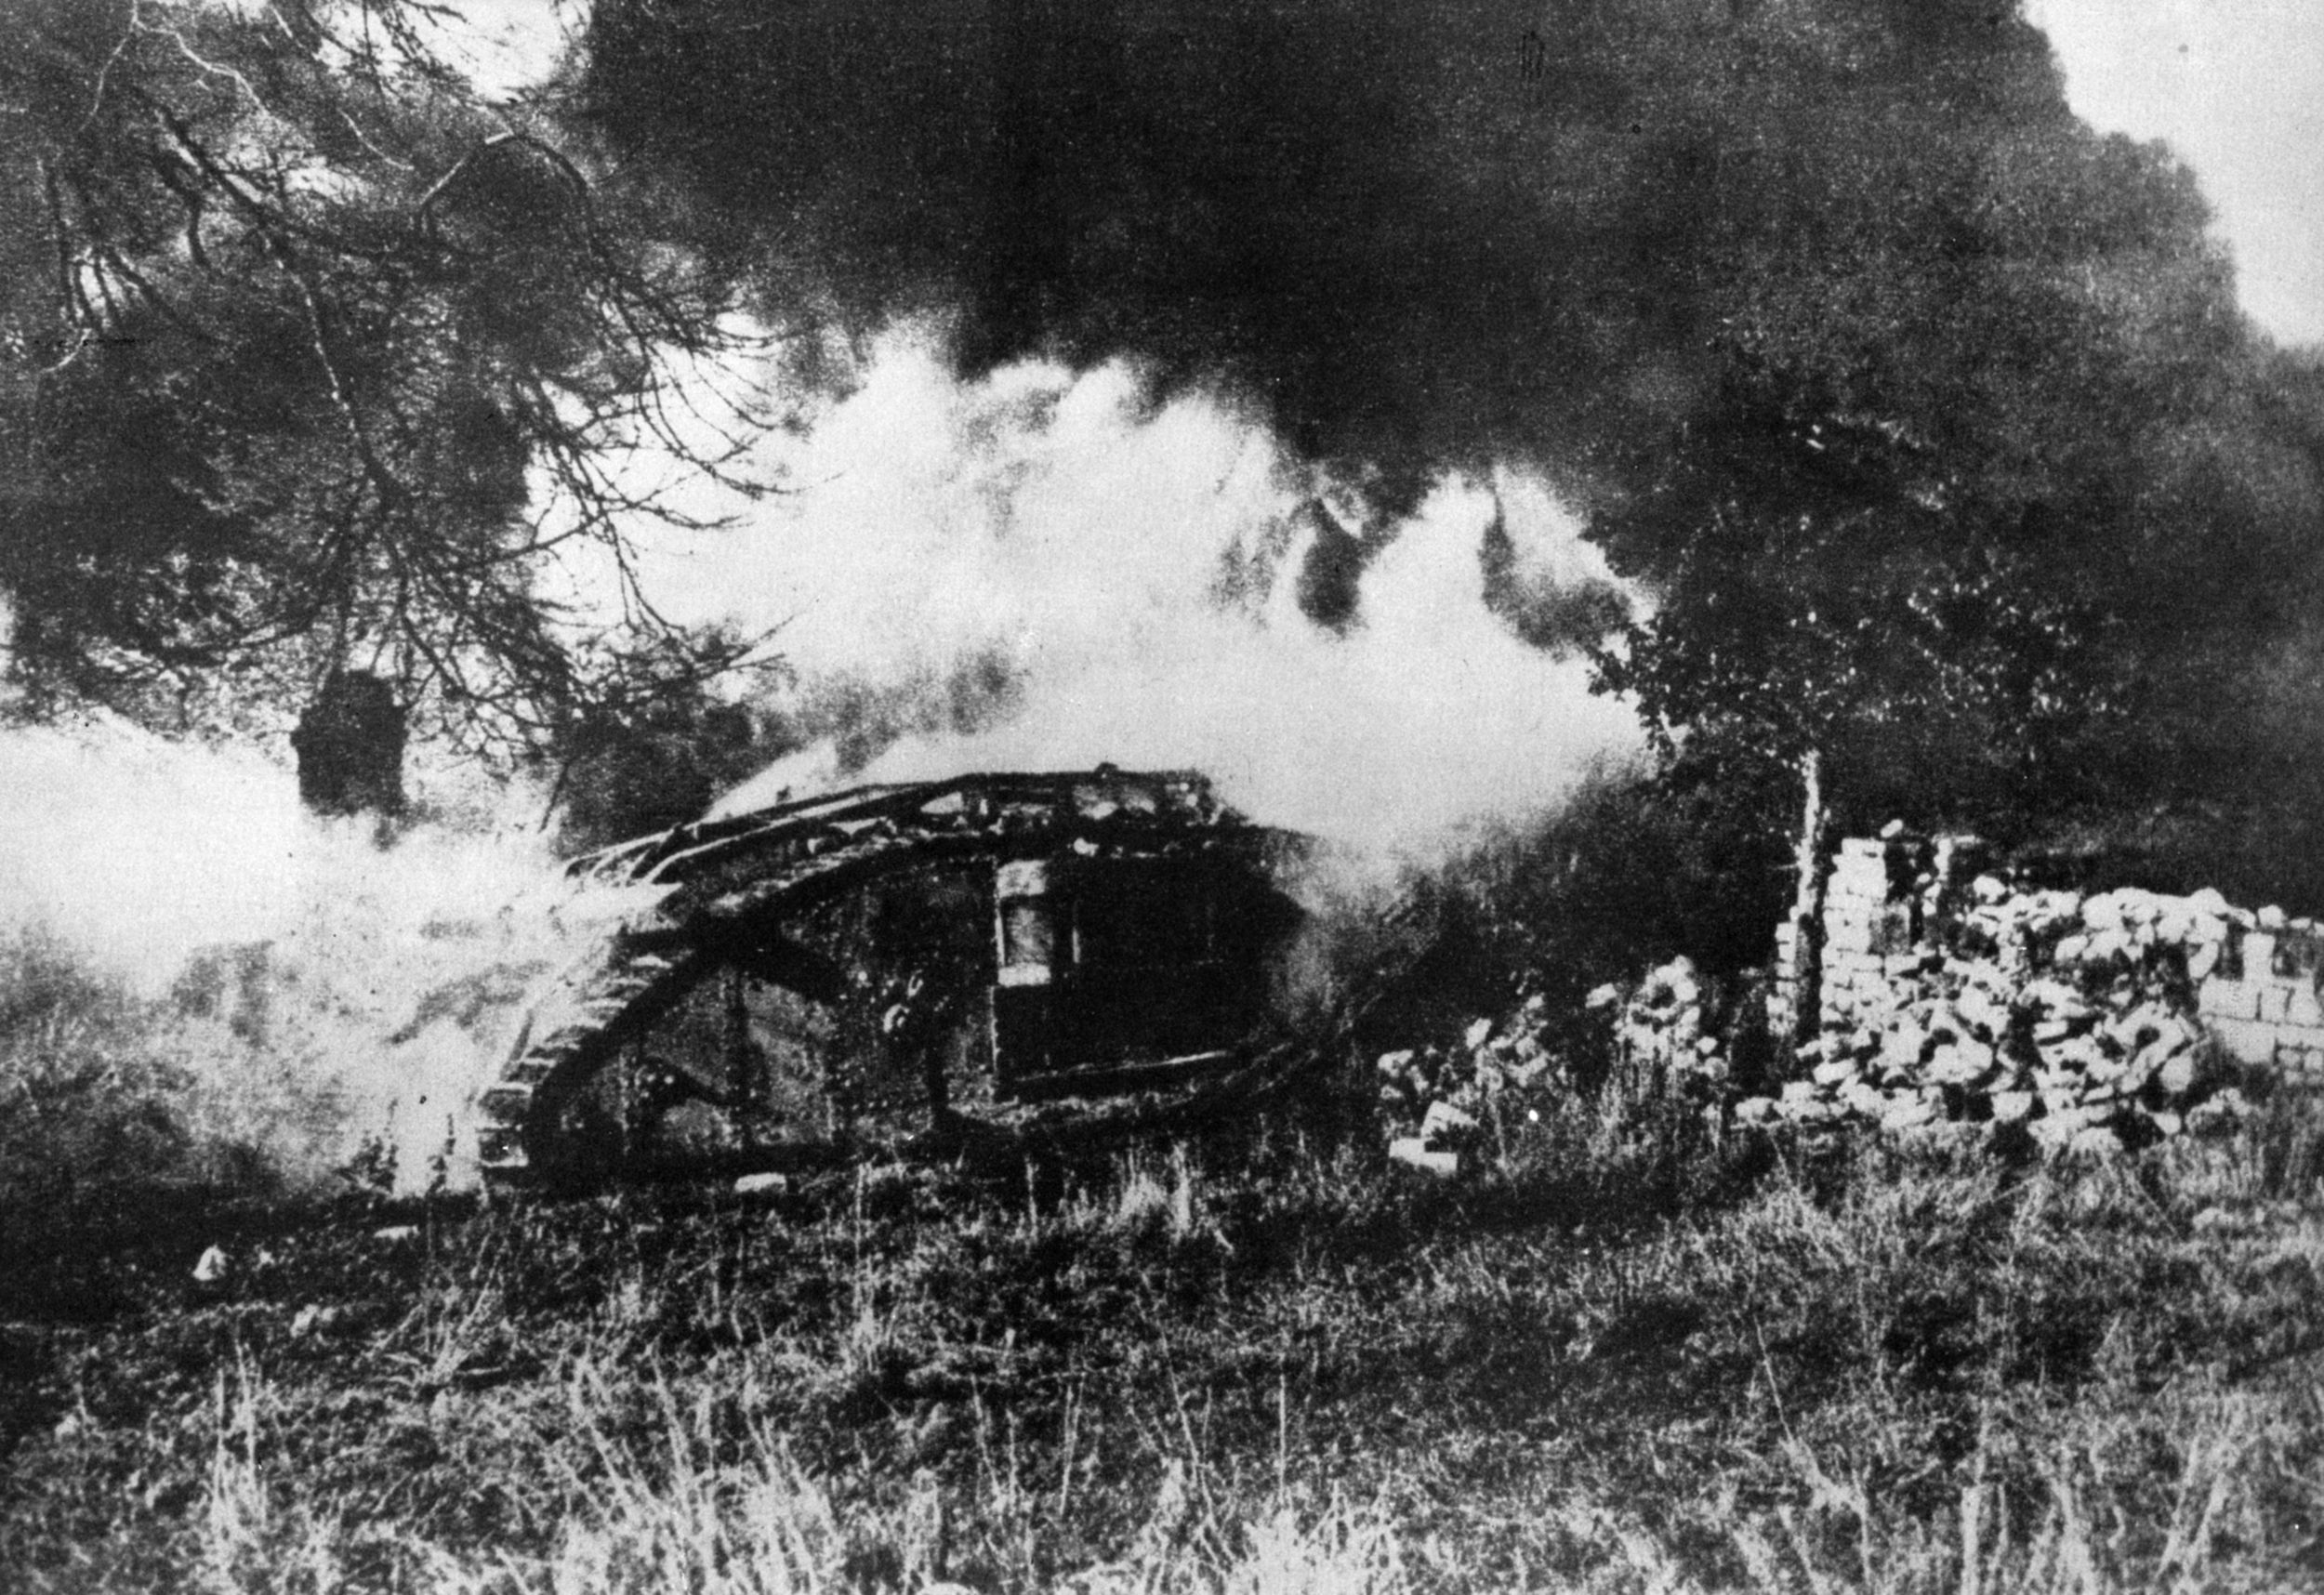 A British tank engulfed in flames during World War I.